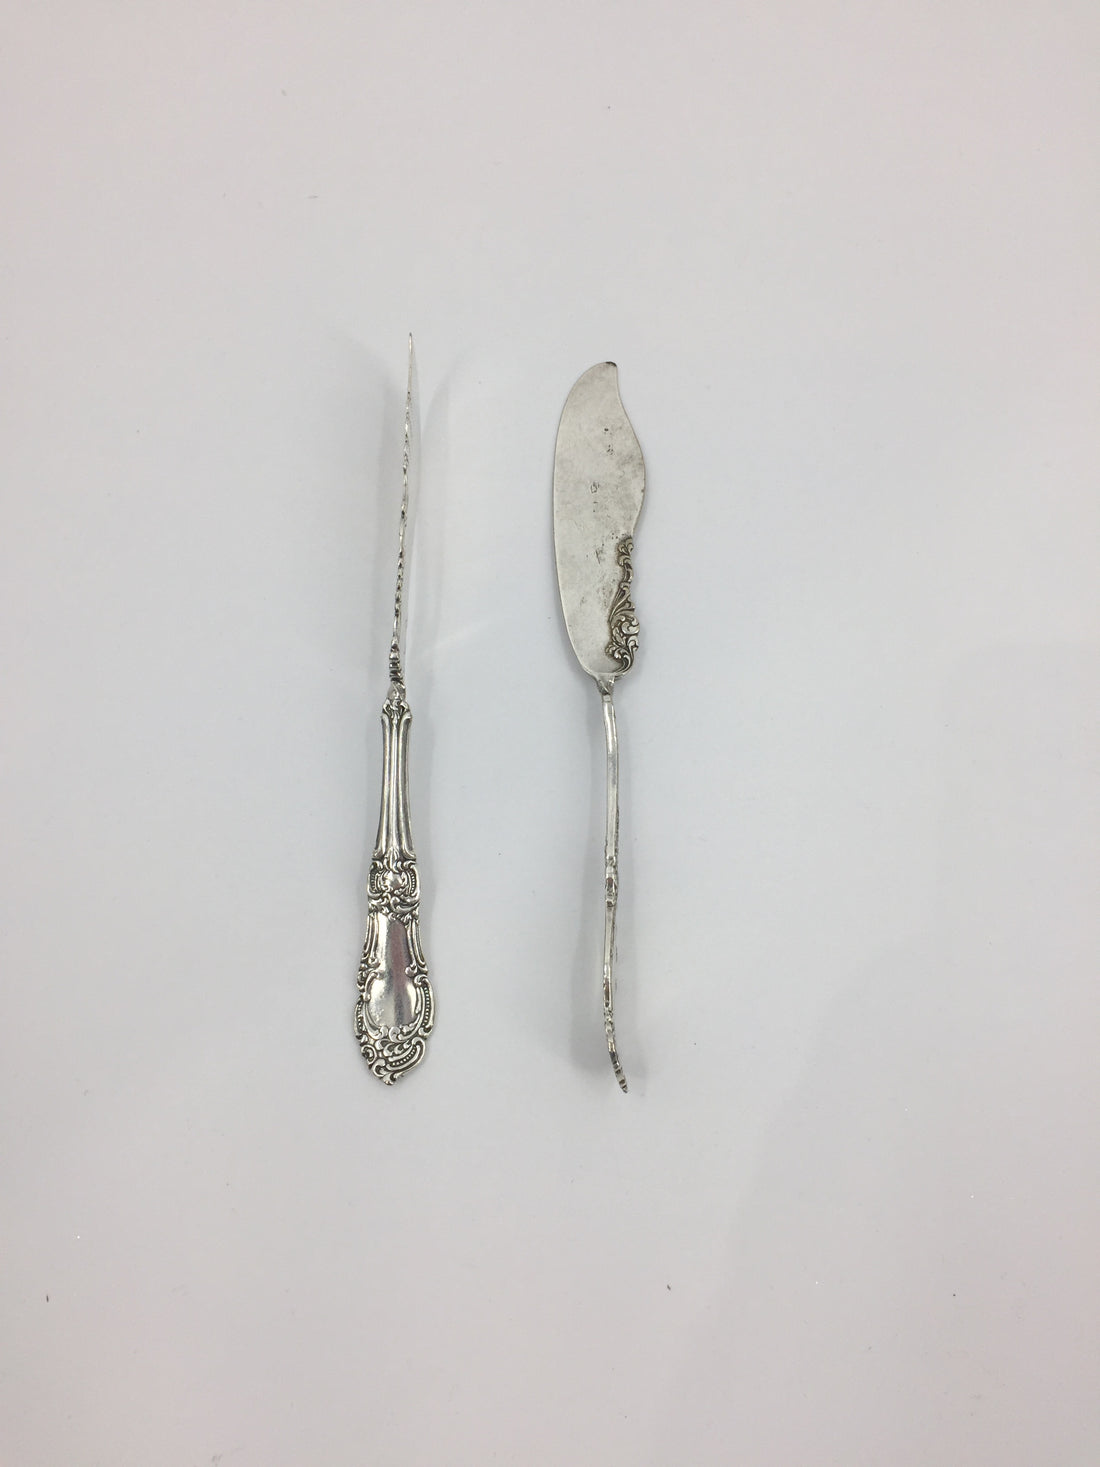 Two Hester &amp; Cook Twisted Butter Knives Open Stock on a white surface.